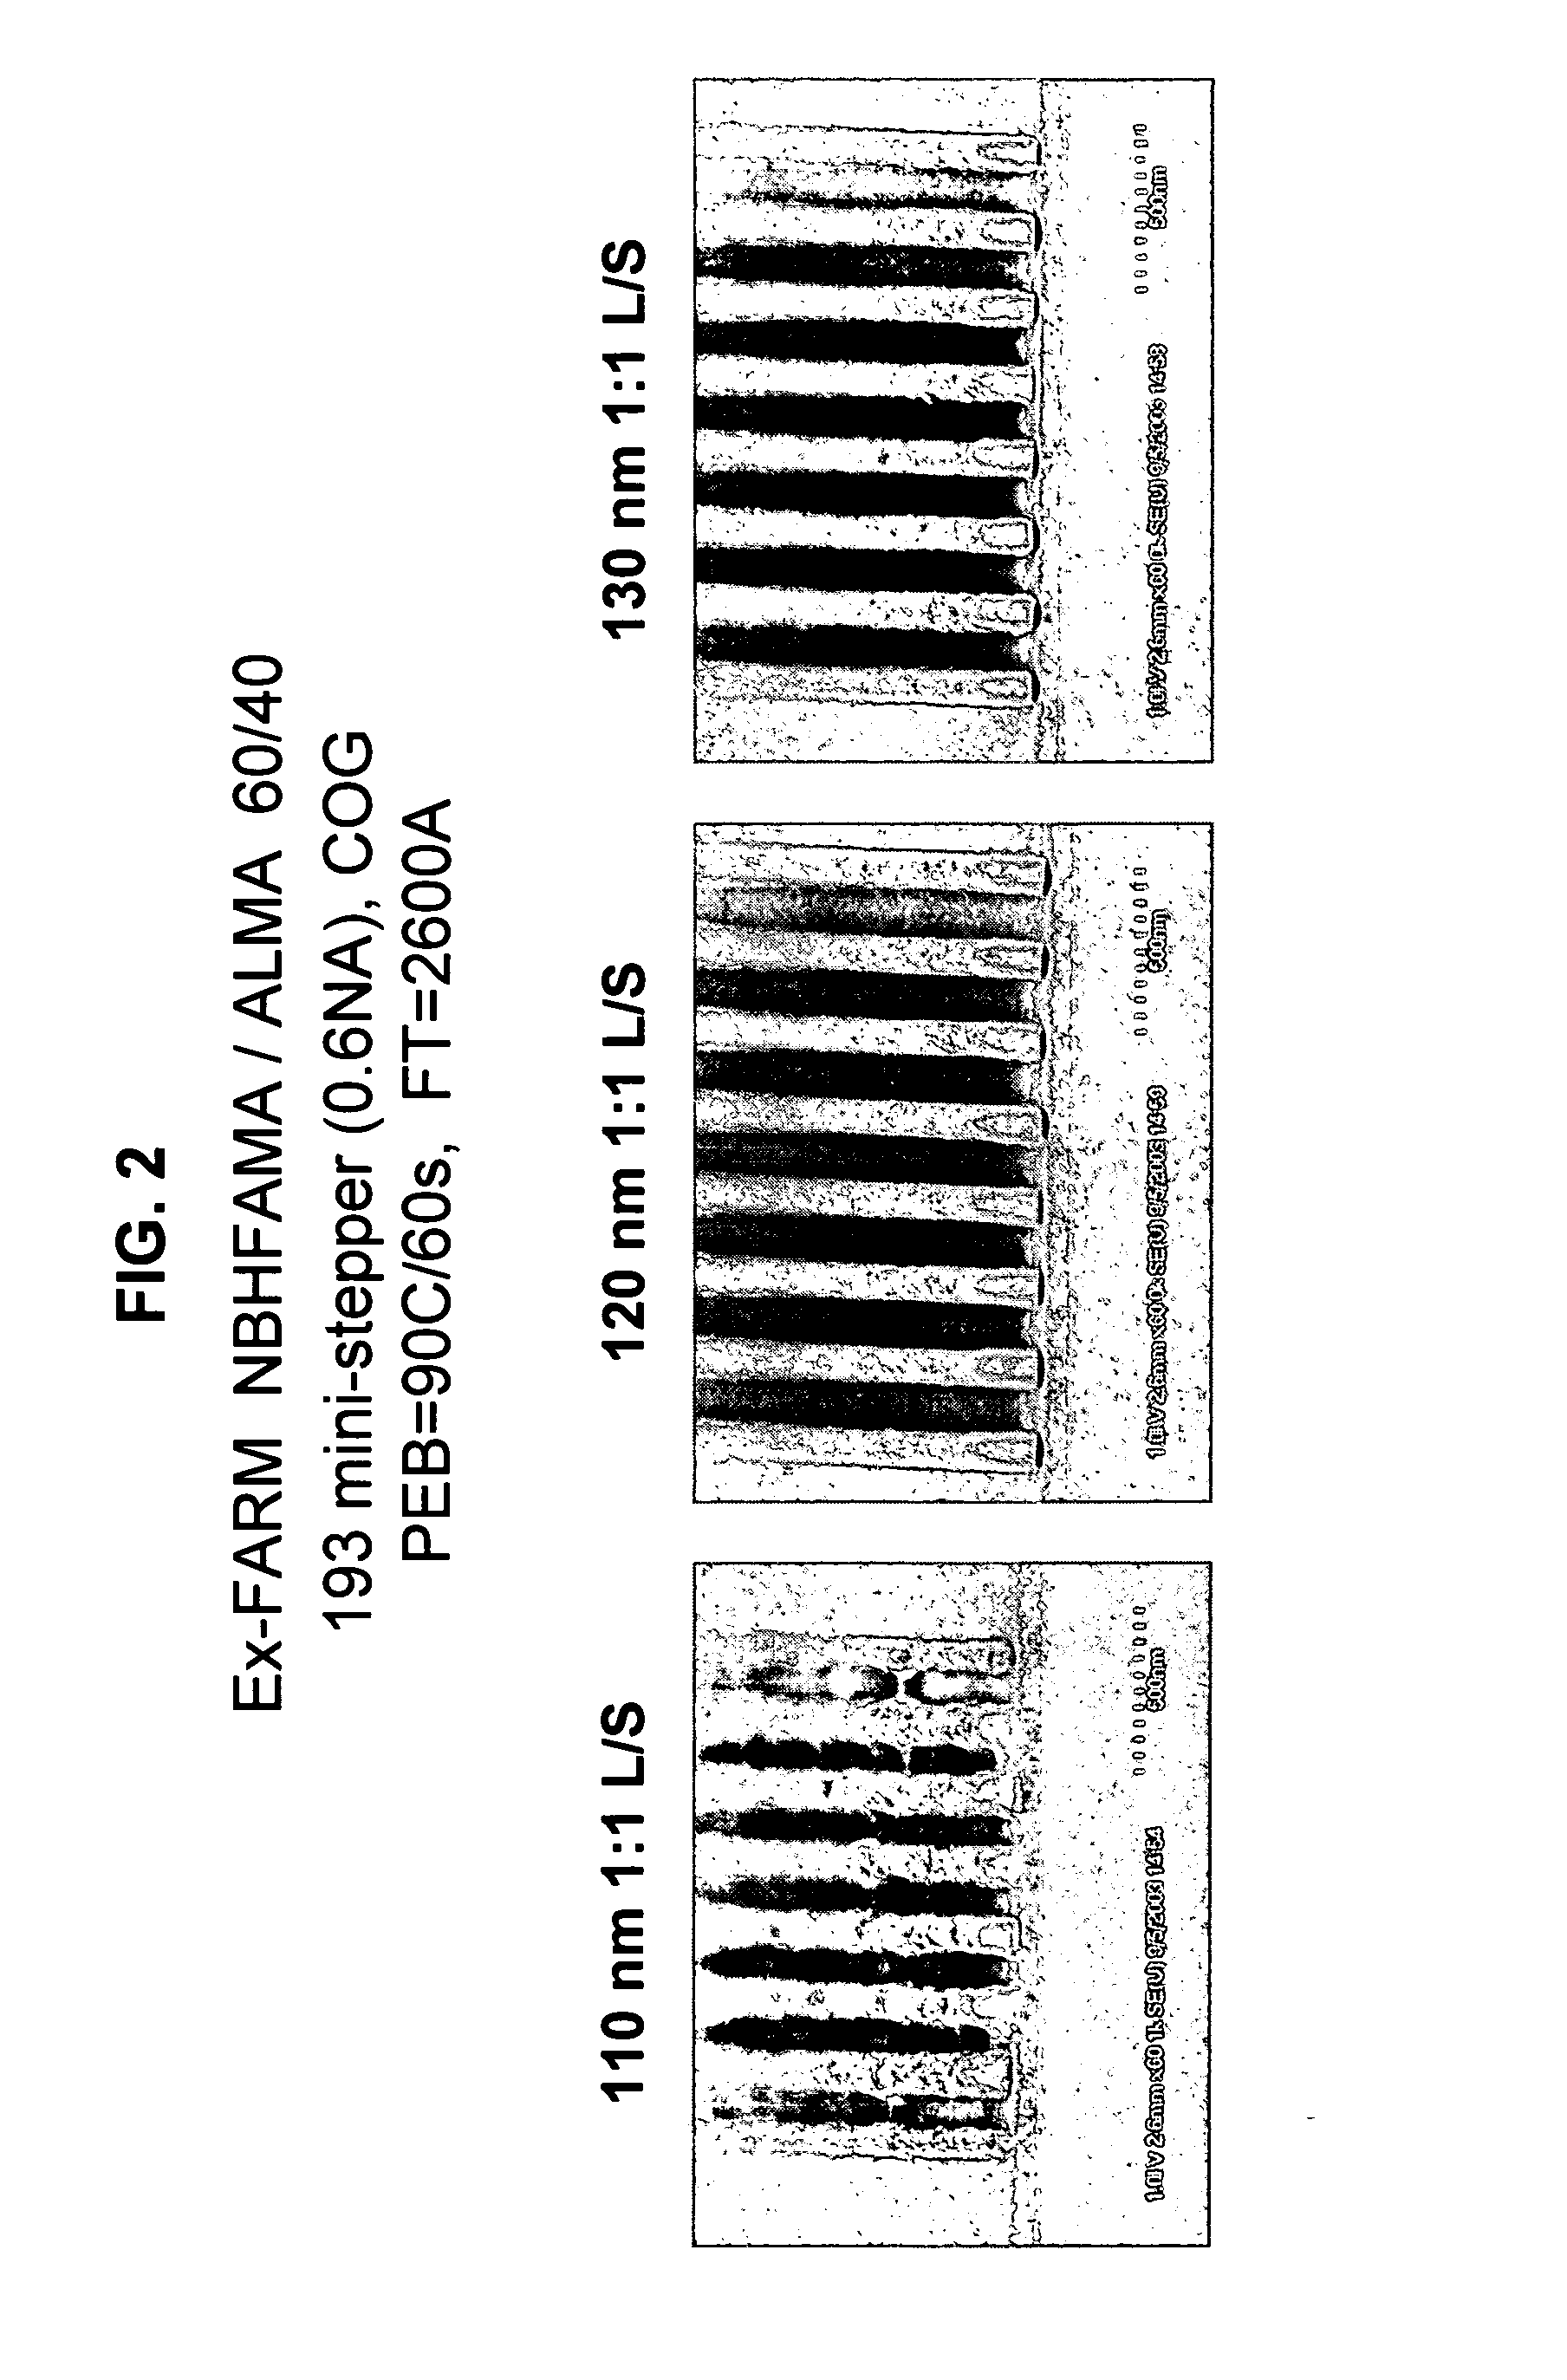 Method for patterning a low activation energy photoresist